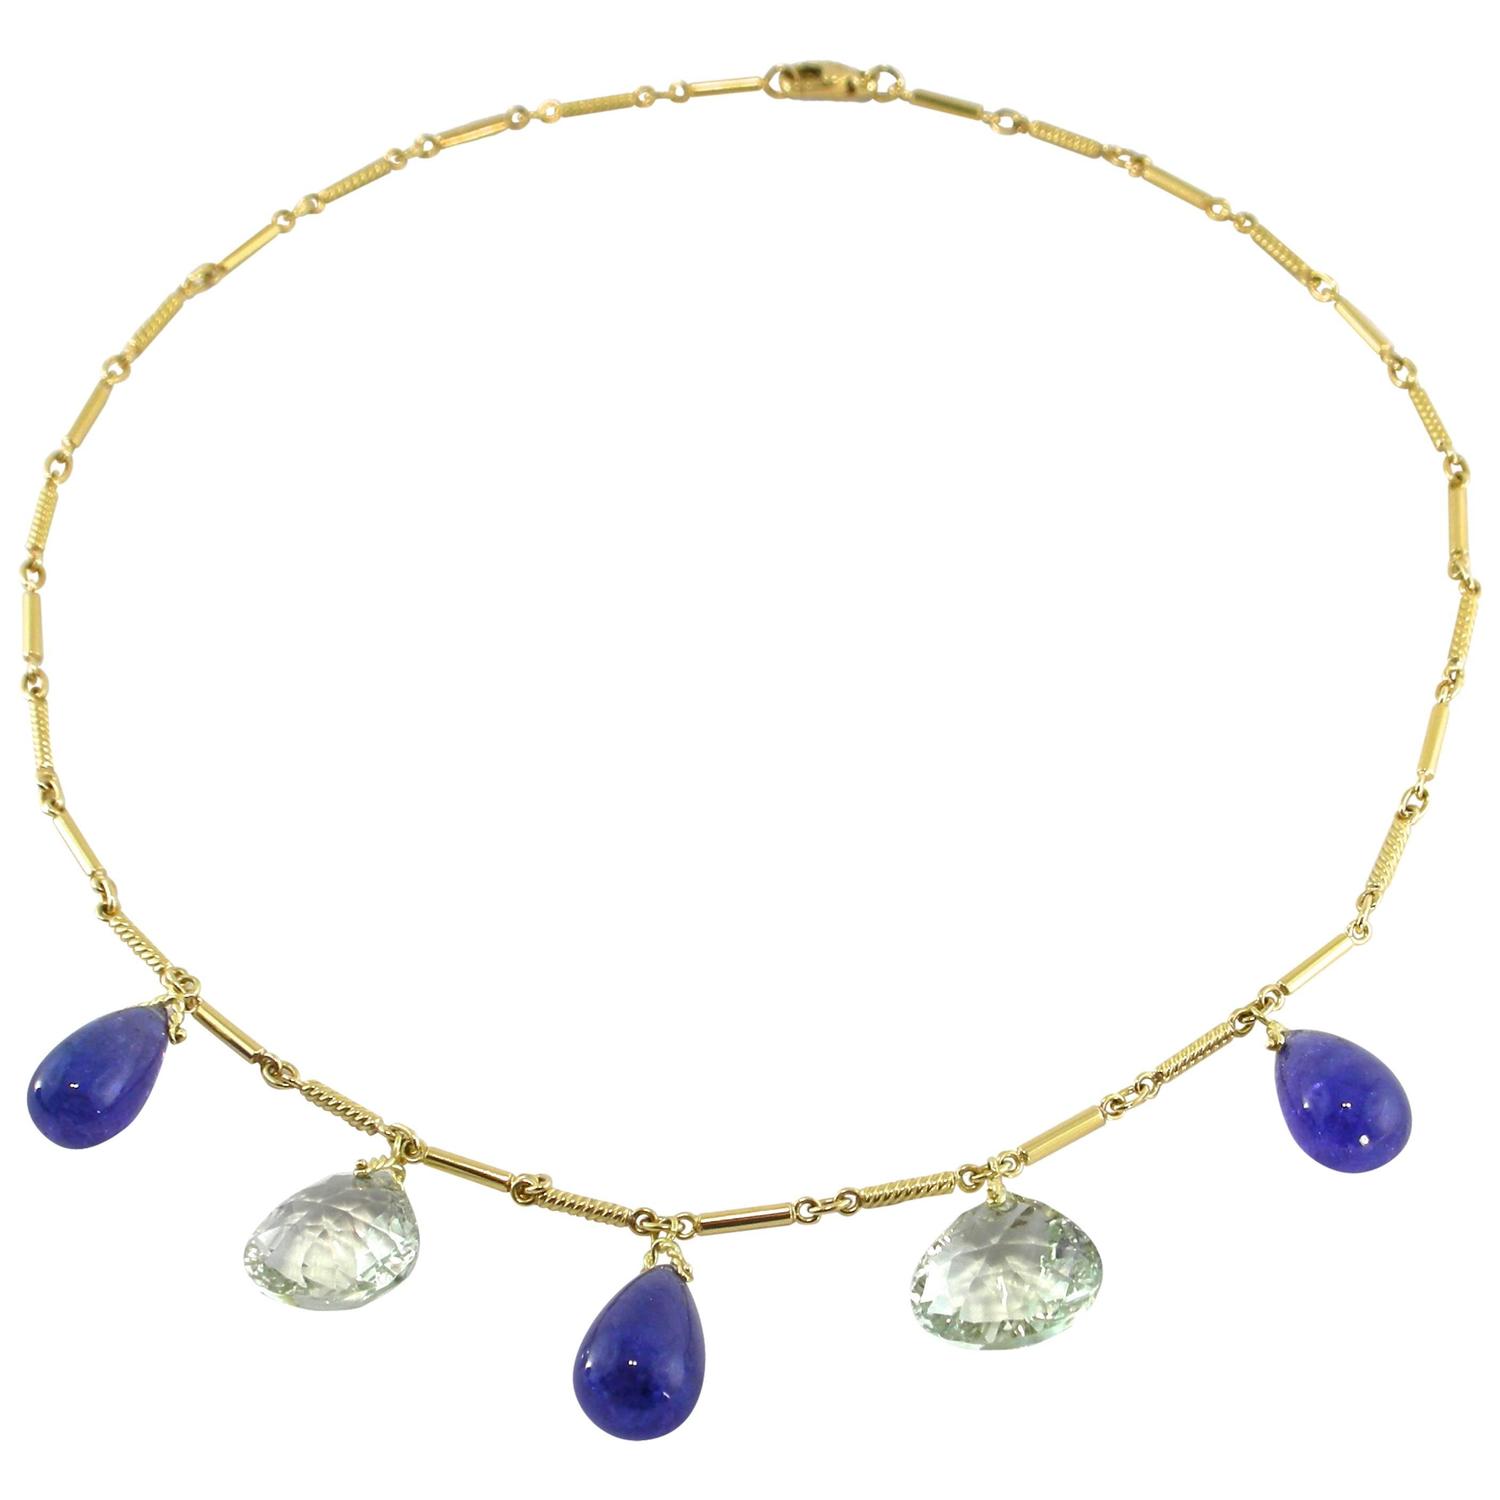 Jona Green Amethyst Tanzanite Gold Drop Necklace For Sale at 1stdibs